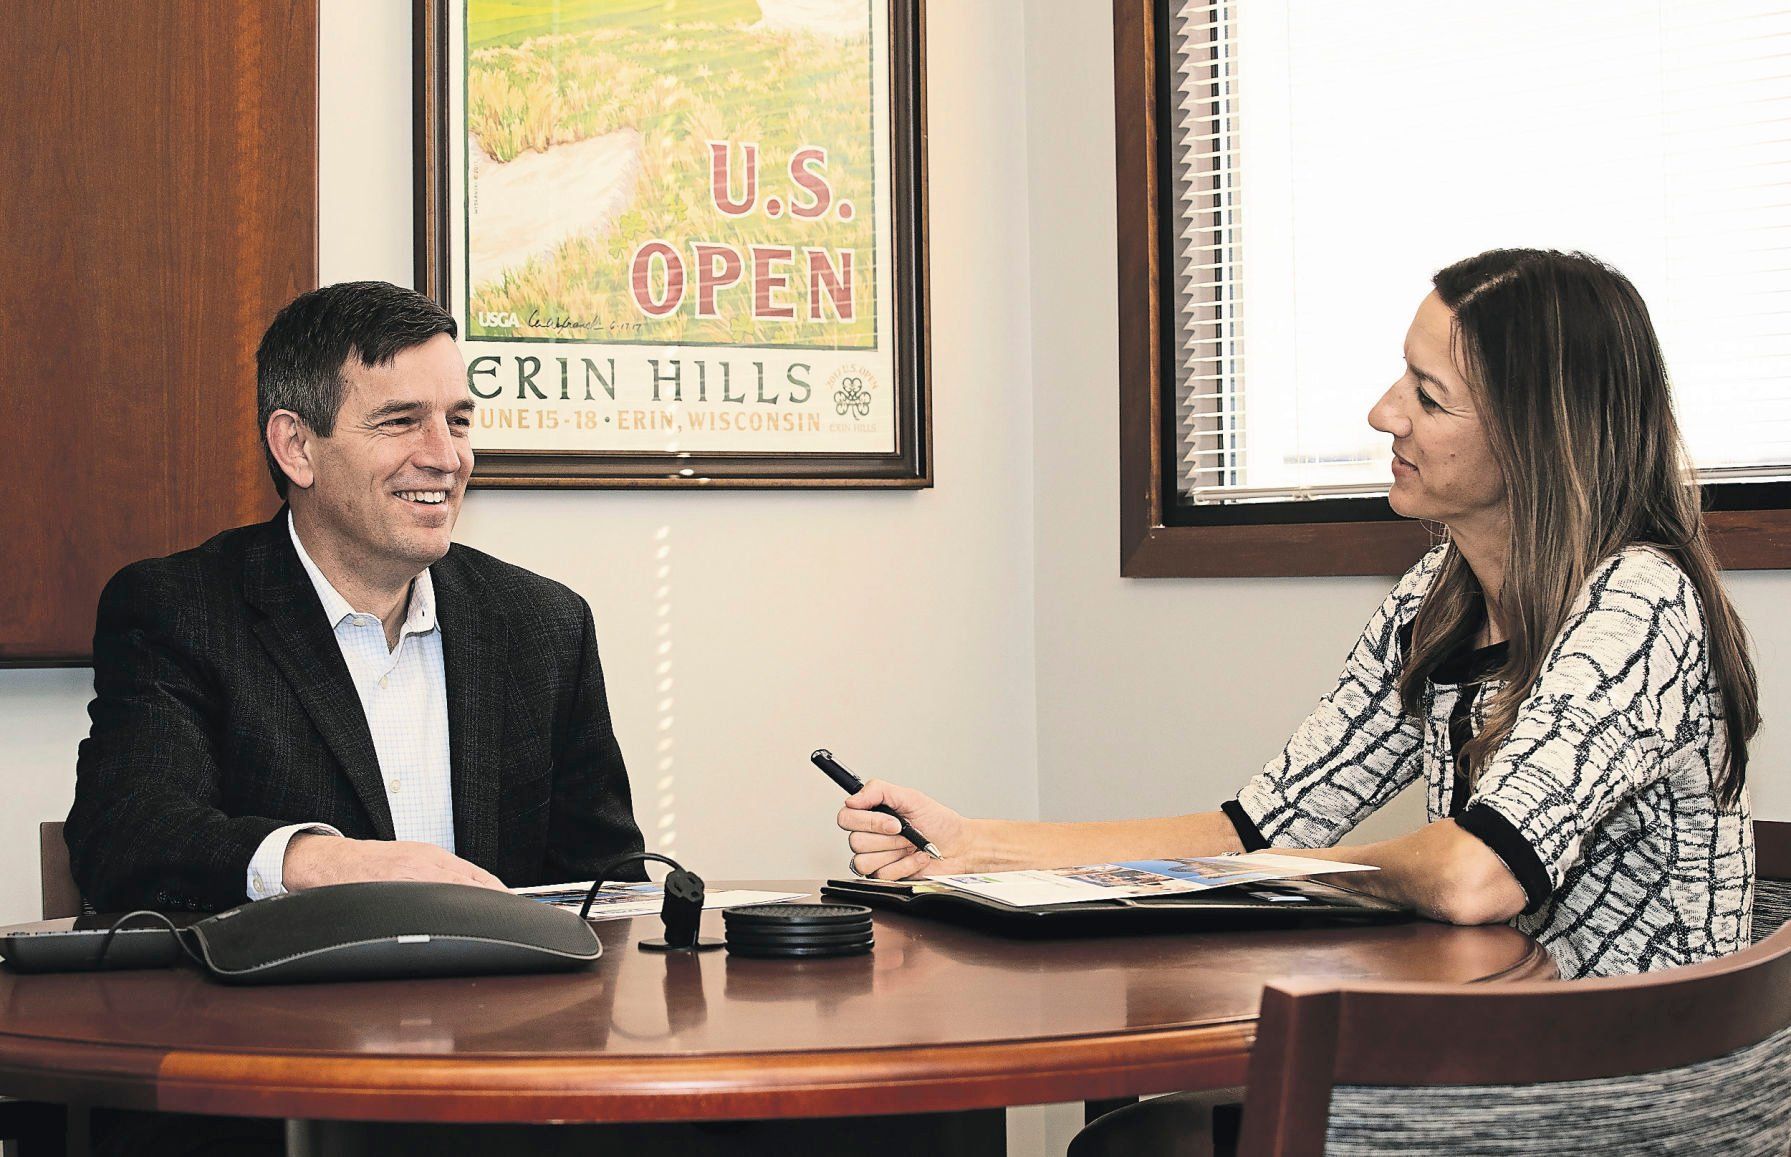 Eric Foy talks with Stacey Hines at the Central Avenue location of Dubuque Bank & Trust.    PHOTO CREDIT: Stephen Gassman